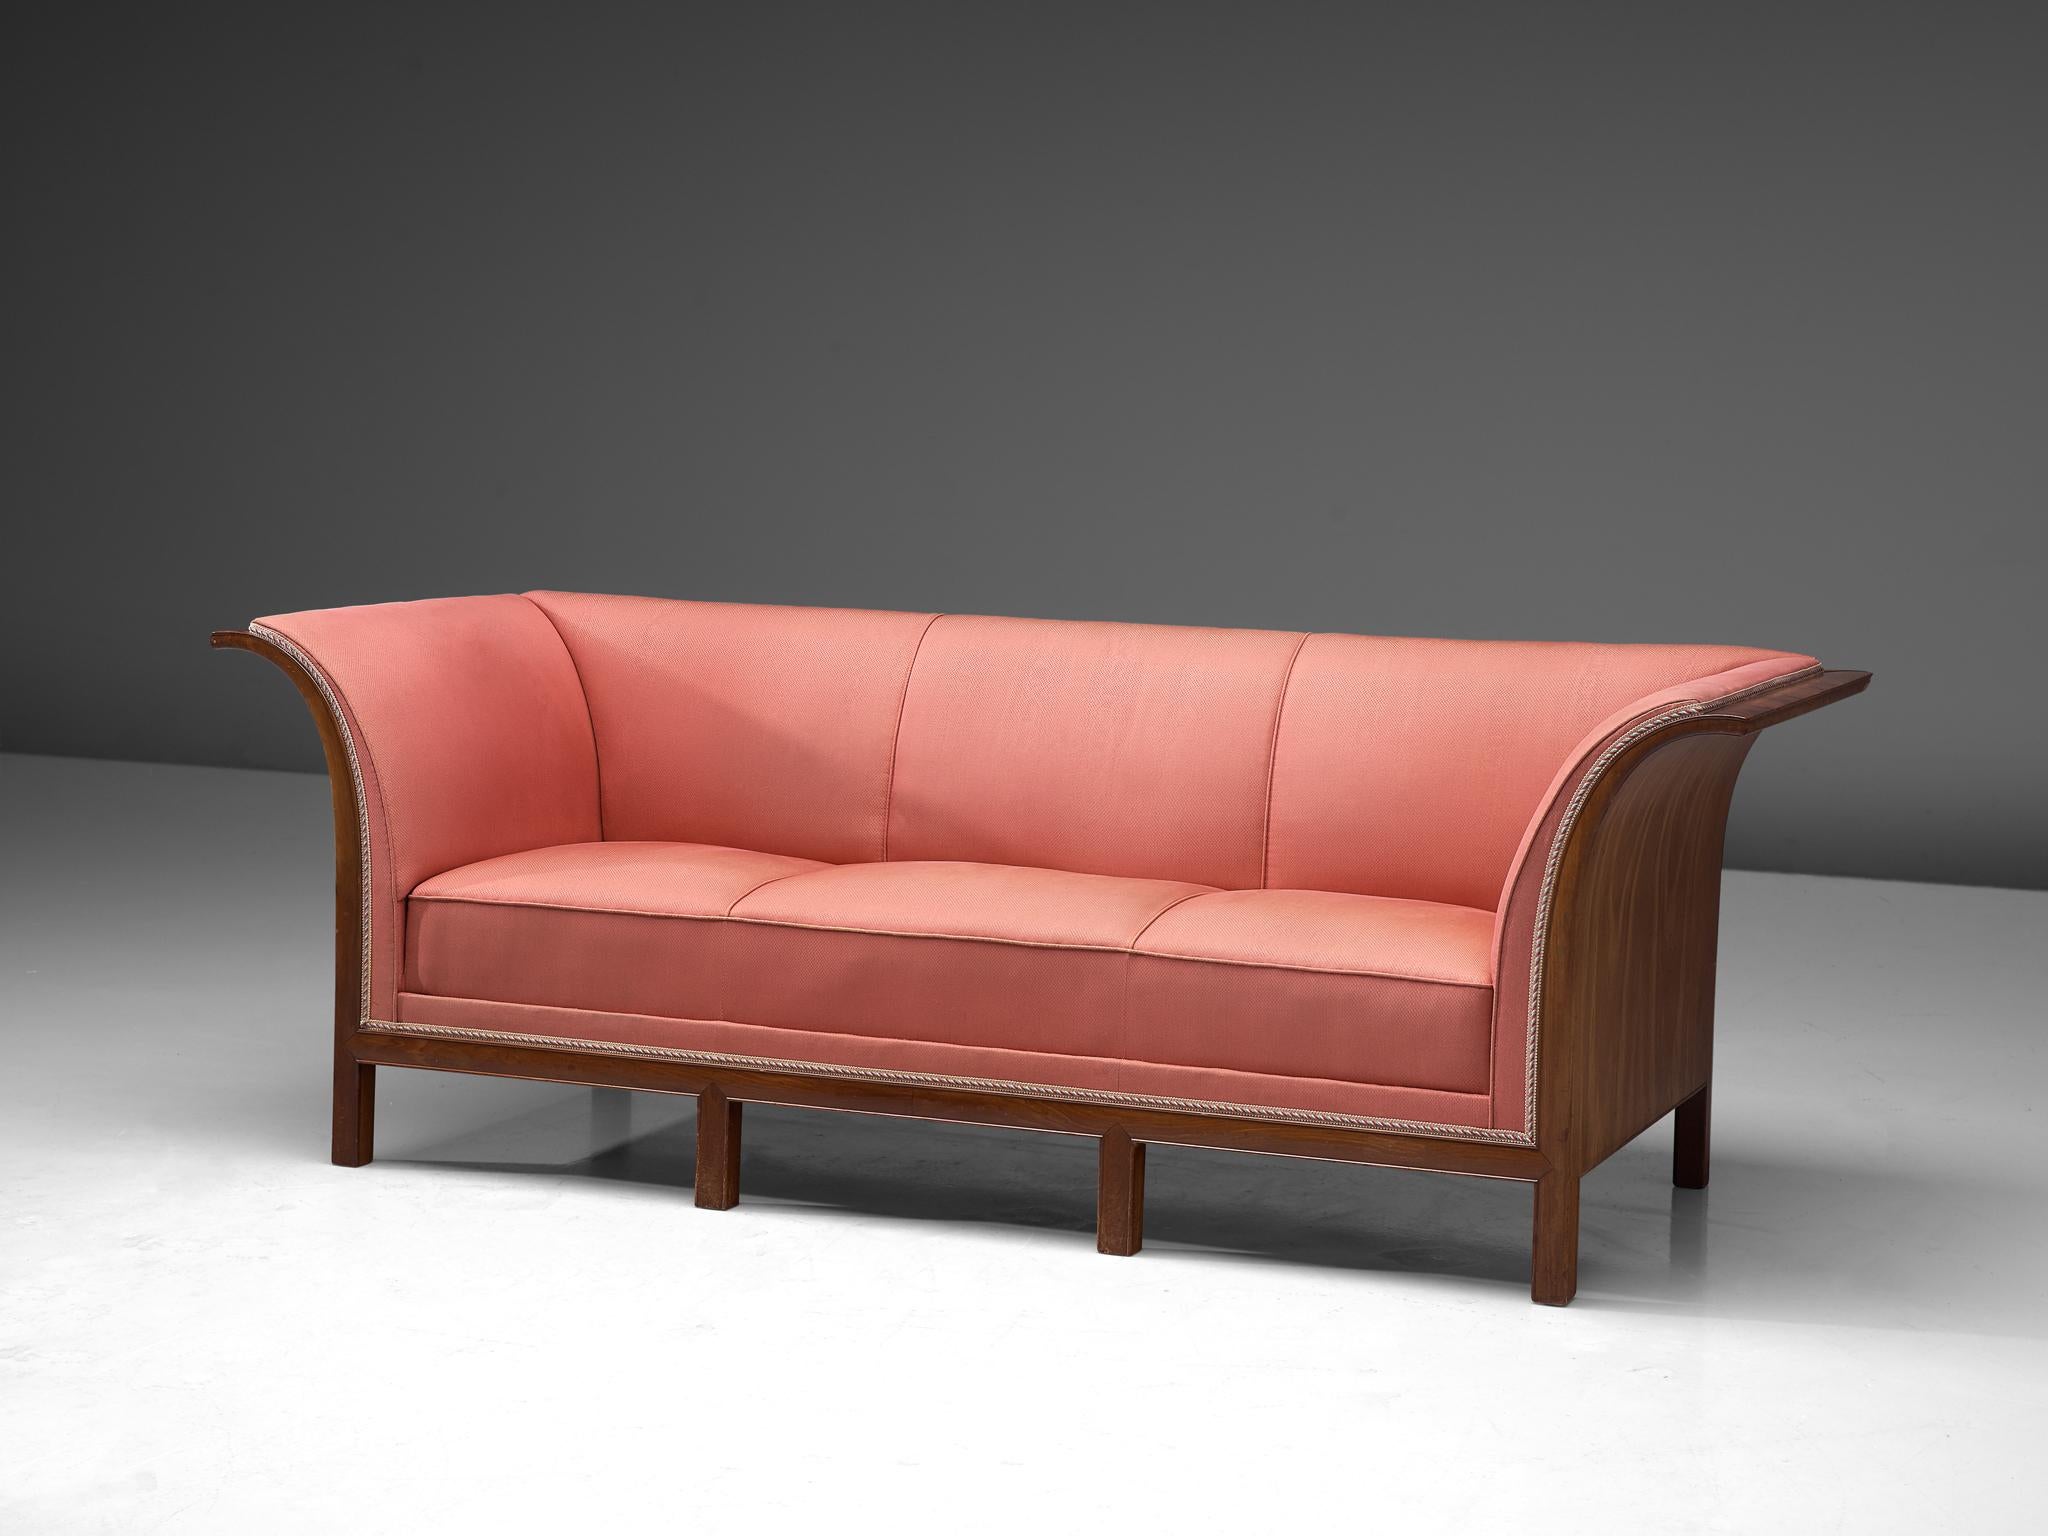 Frits Henningsen, sofa, mahogany, pink fabric, Denmark, 1930s

This classic sofa was designed and produced by master cabinet maker Frits Henningsen around the 1930s. The basic design is well-balanced, showing an interesting contrast between the